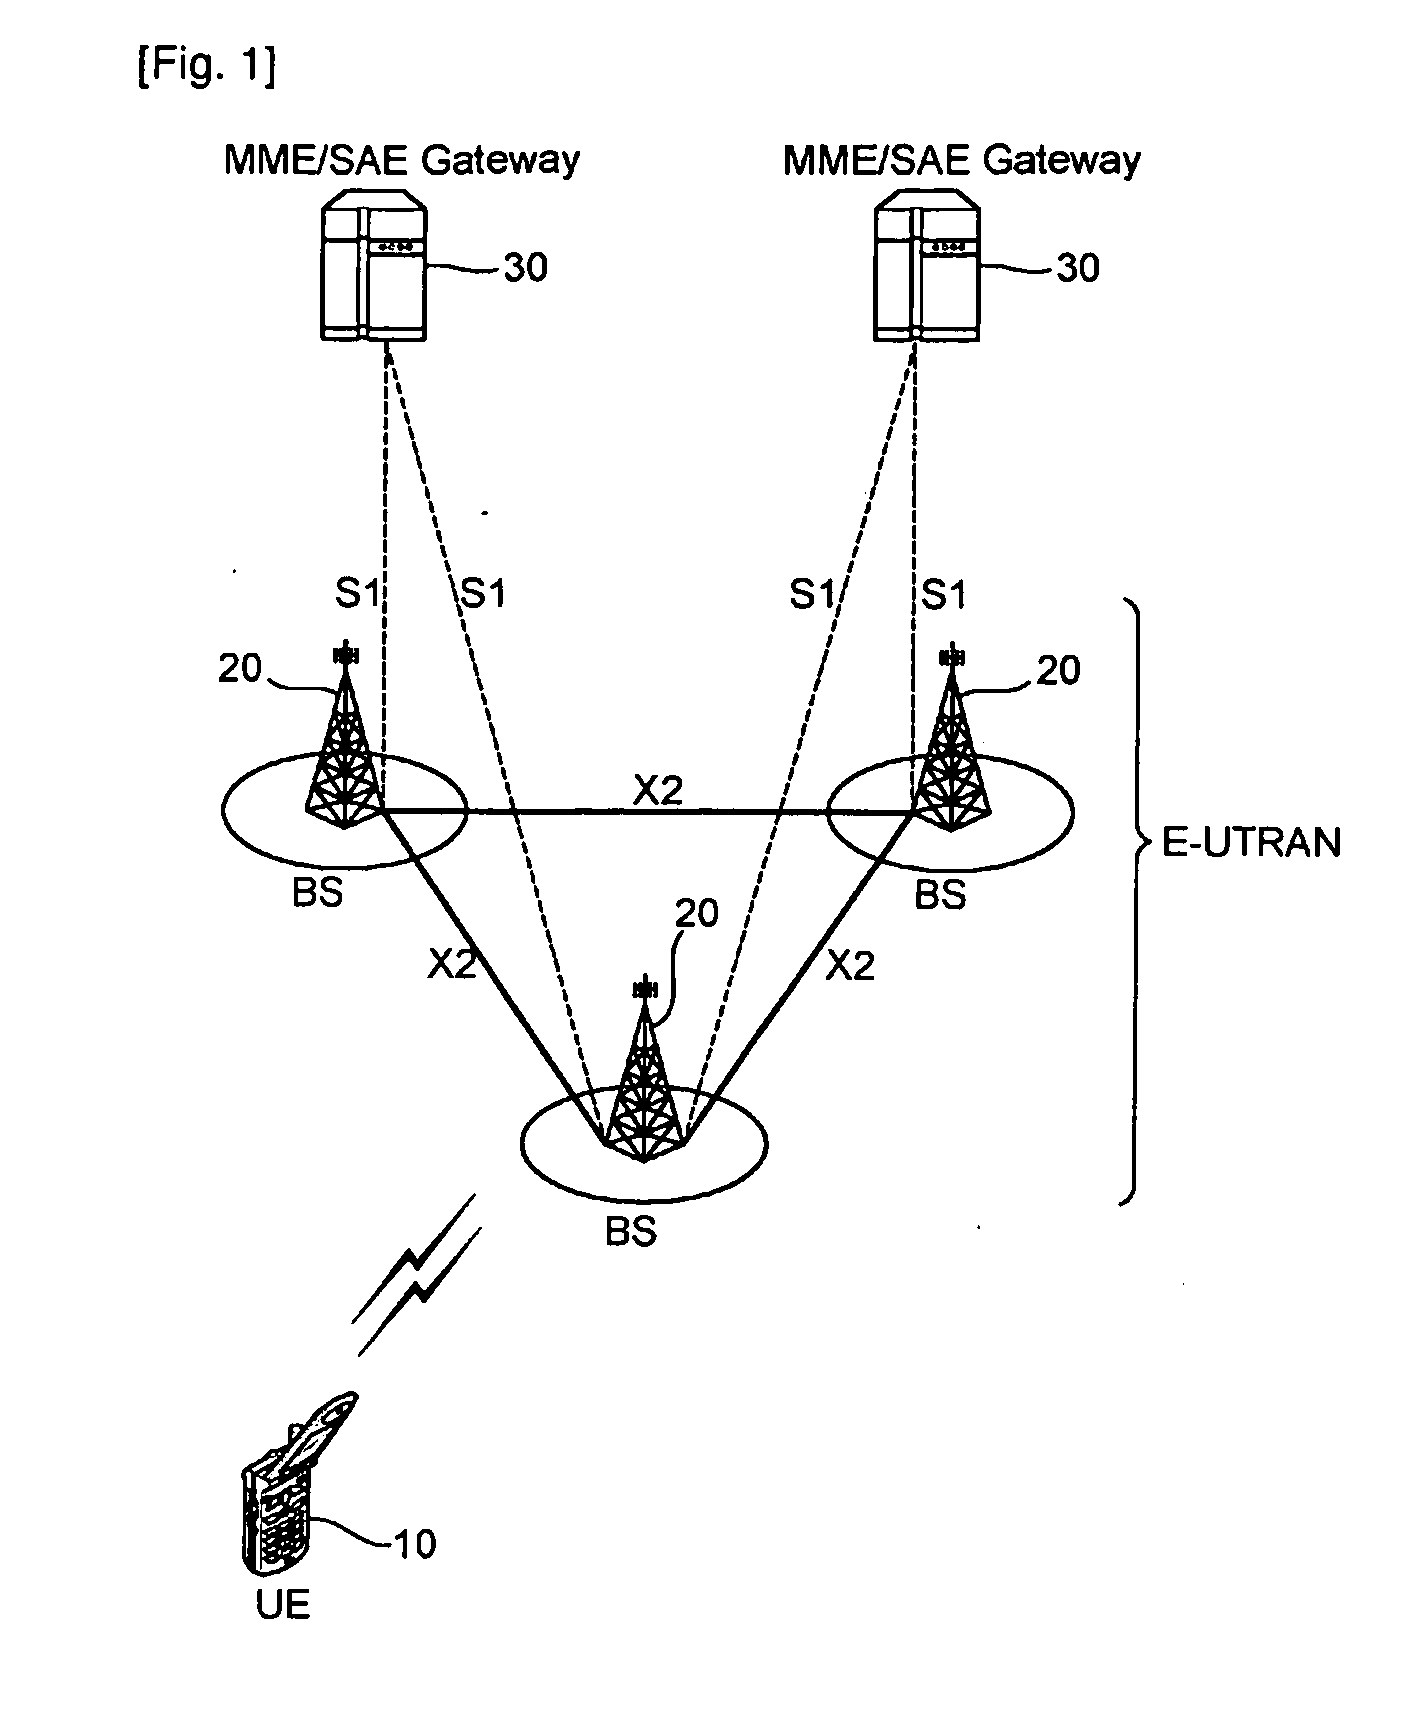 Method of performing cell reselection in wireless communication system